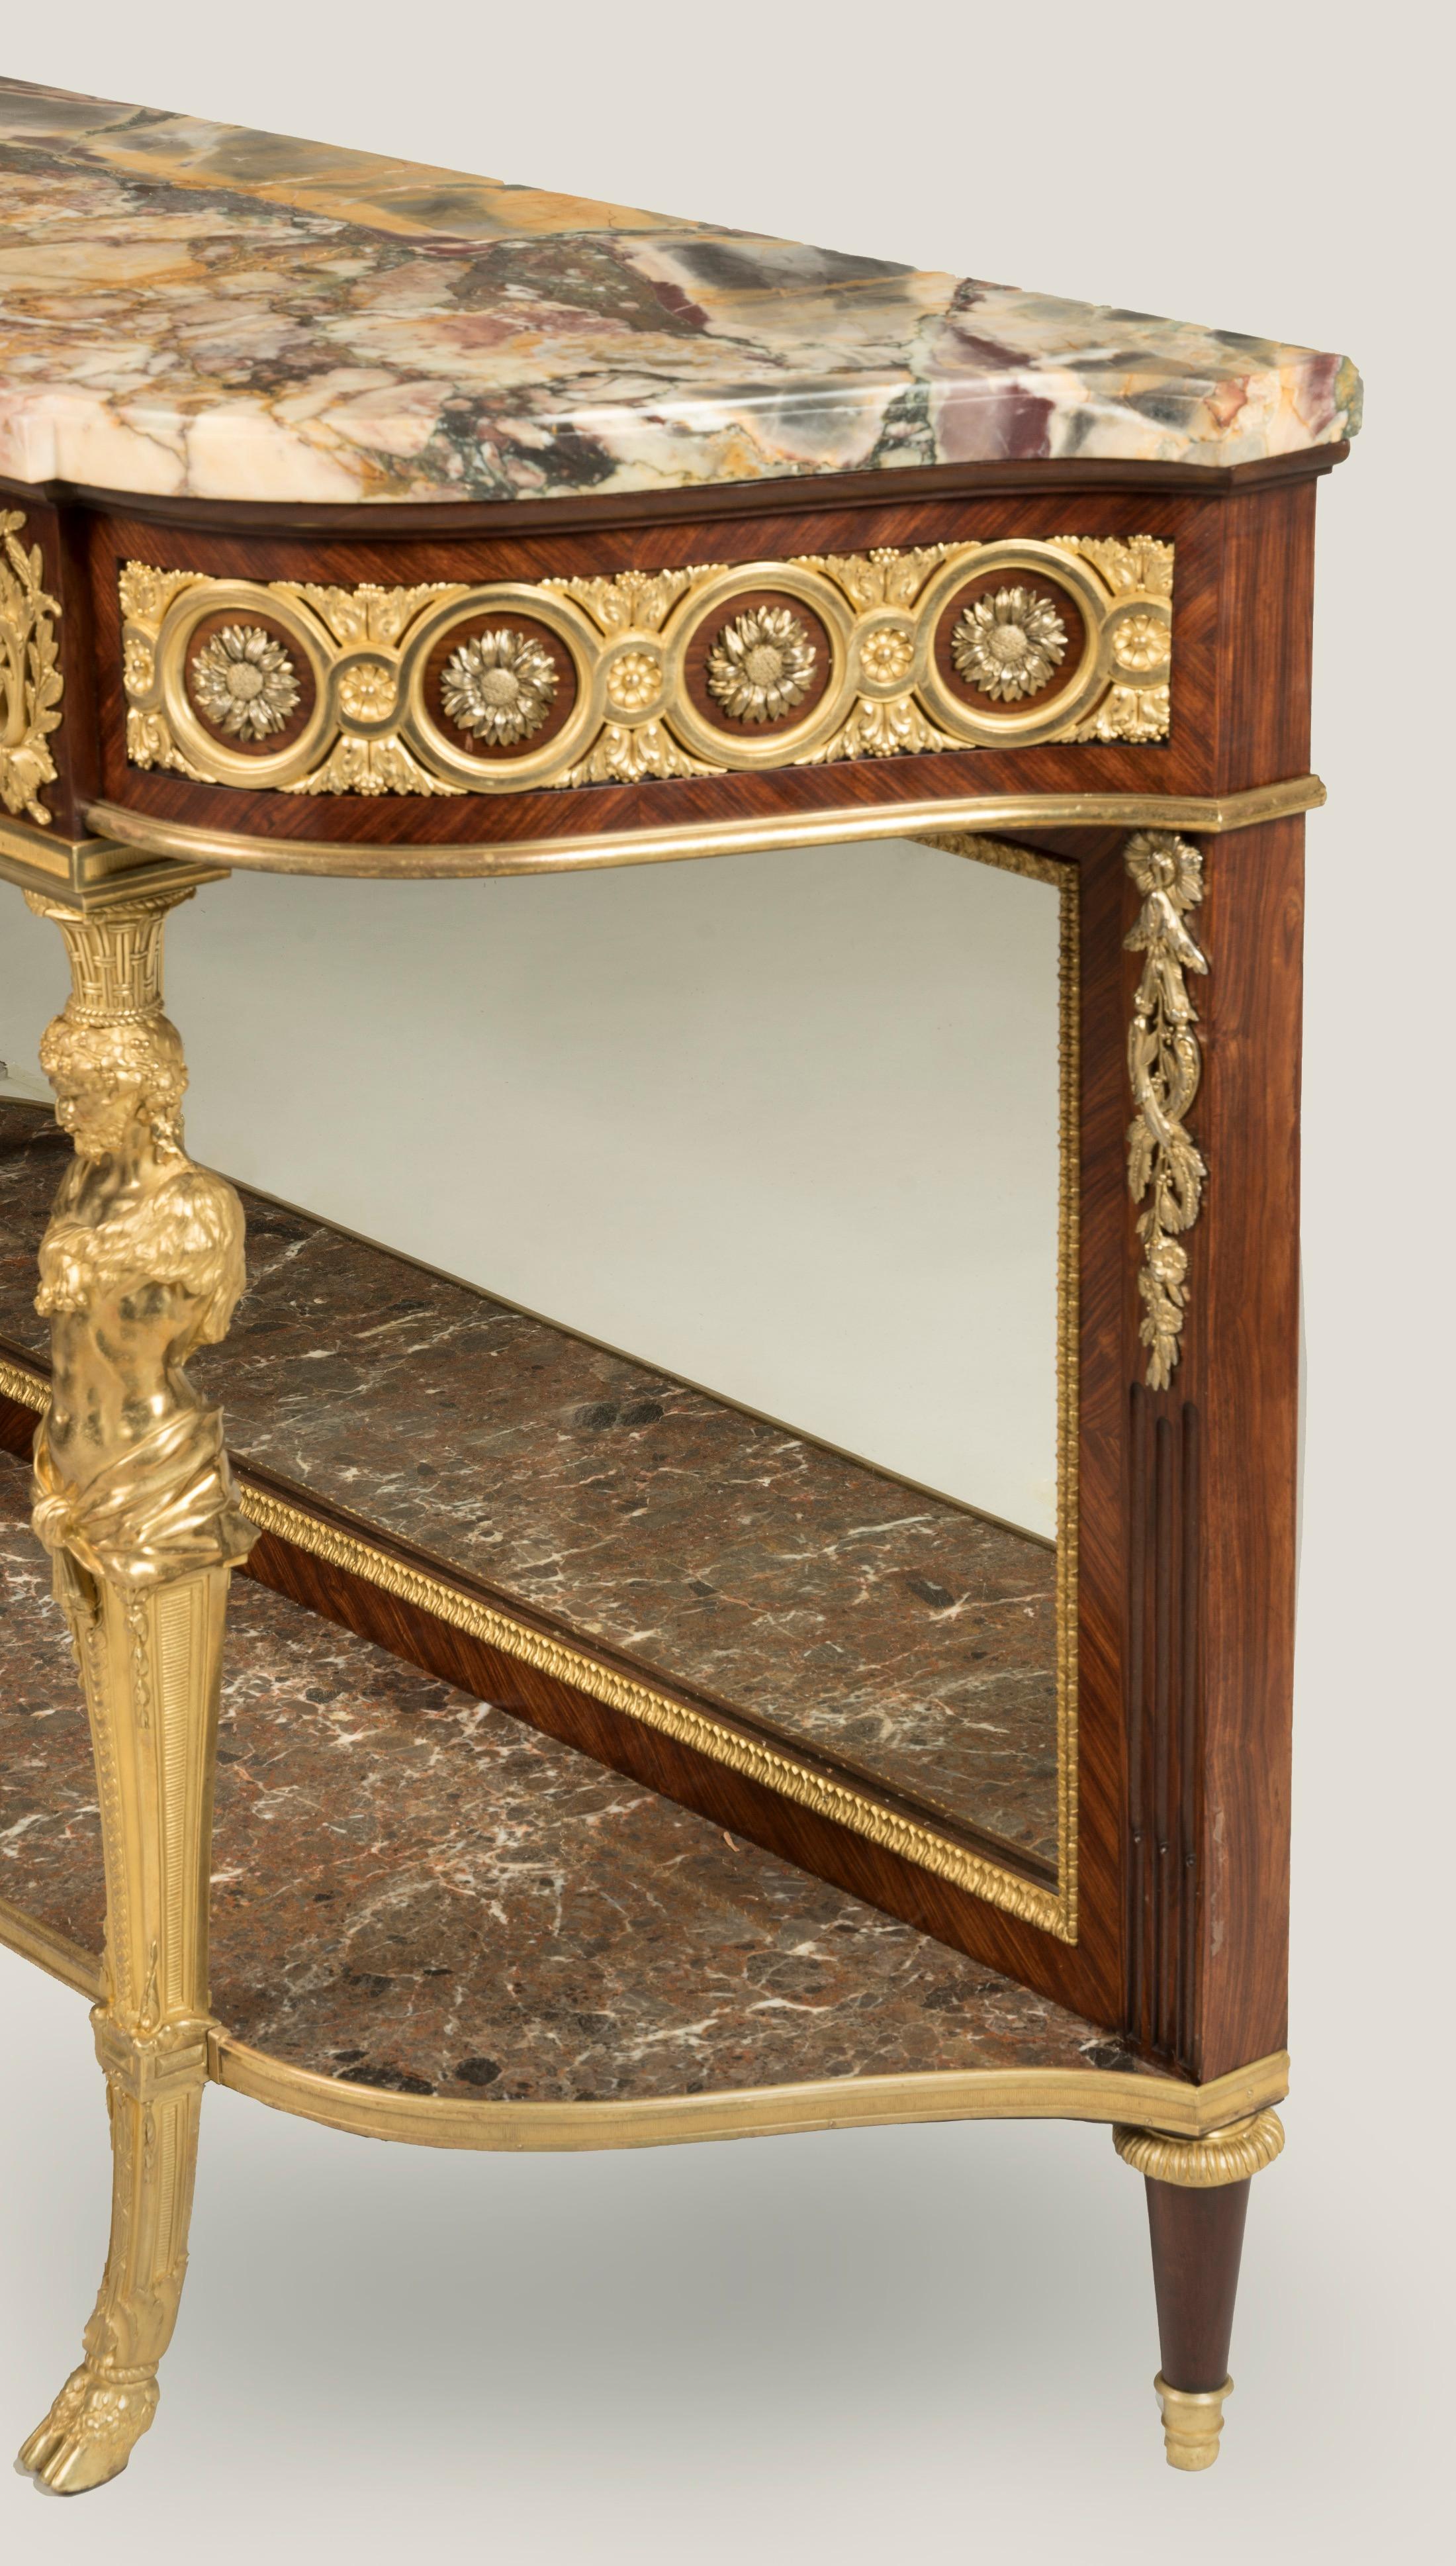 19th Century French Ormolu-Mounted Kingwood Console Table in the Louis XVI Style For Sale 2